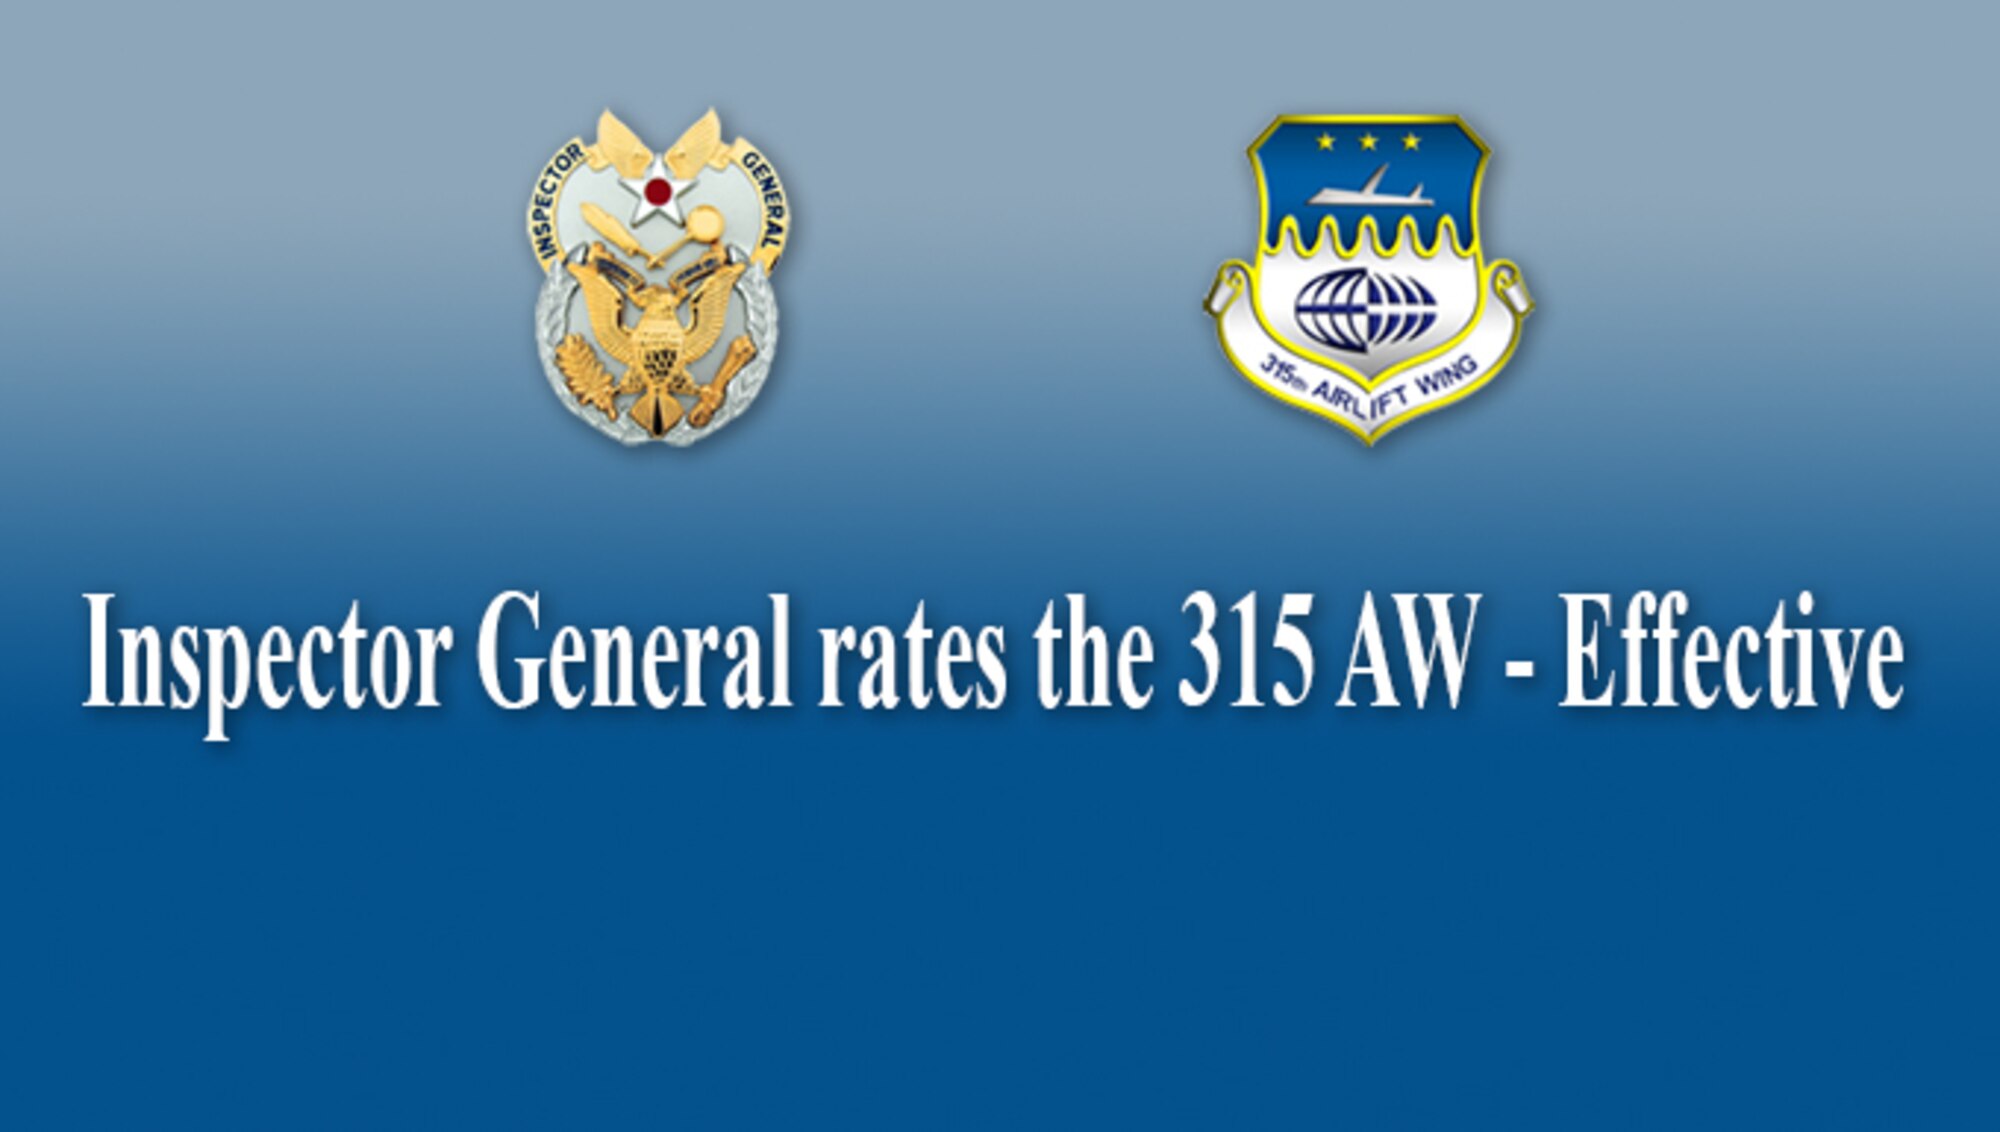 IG rates 315 AW as 'Effective'